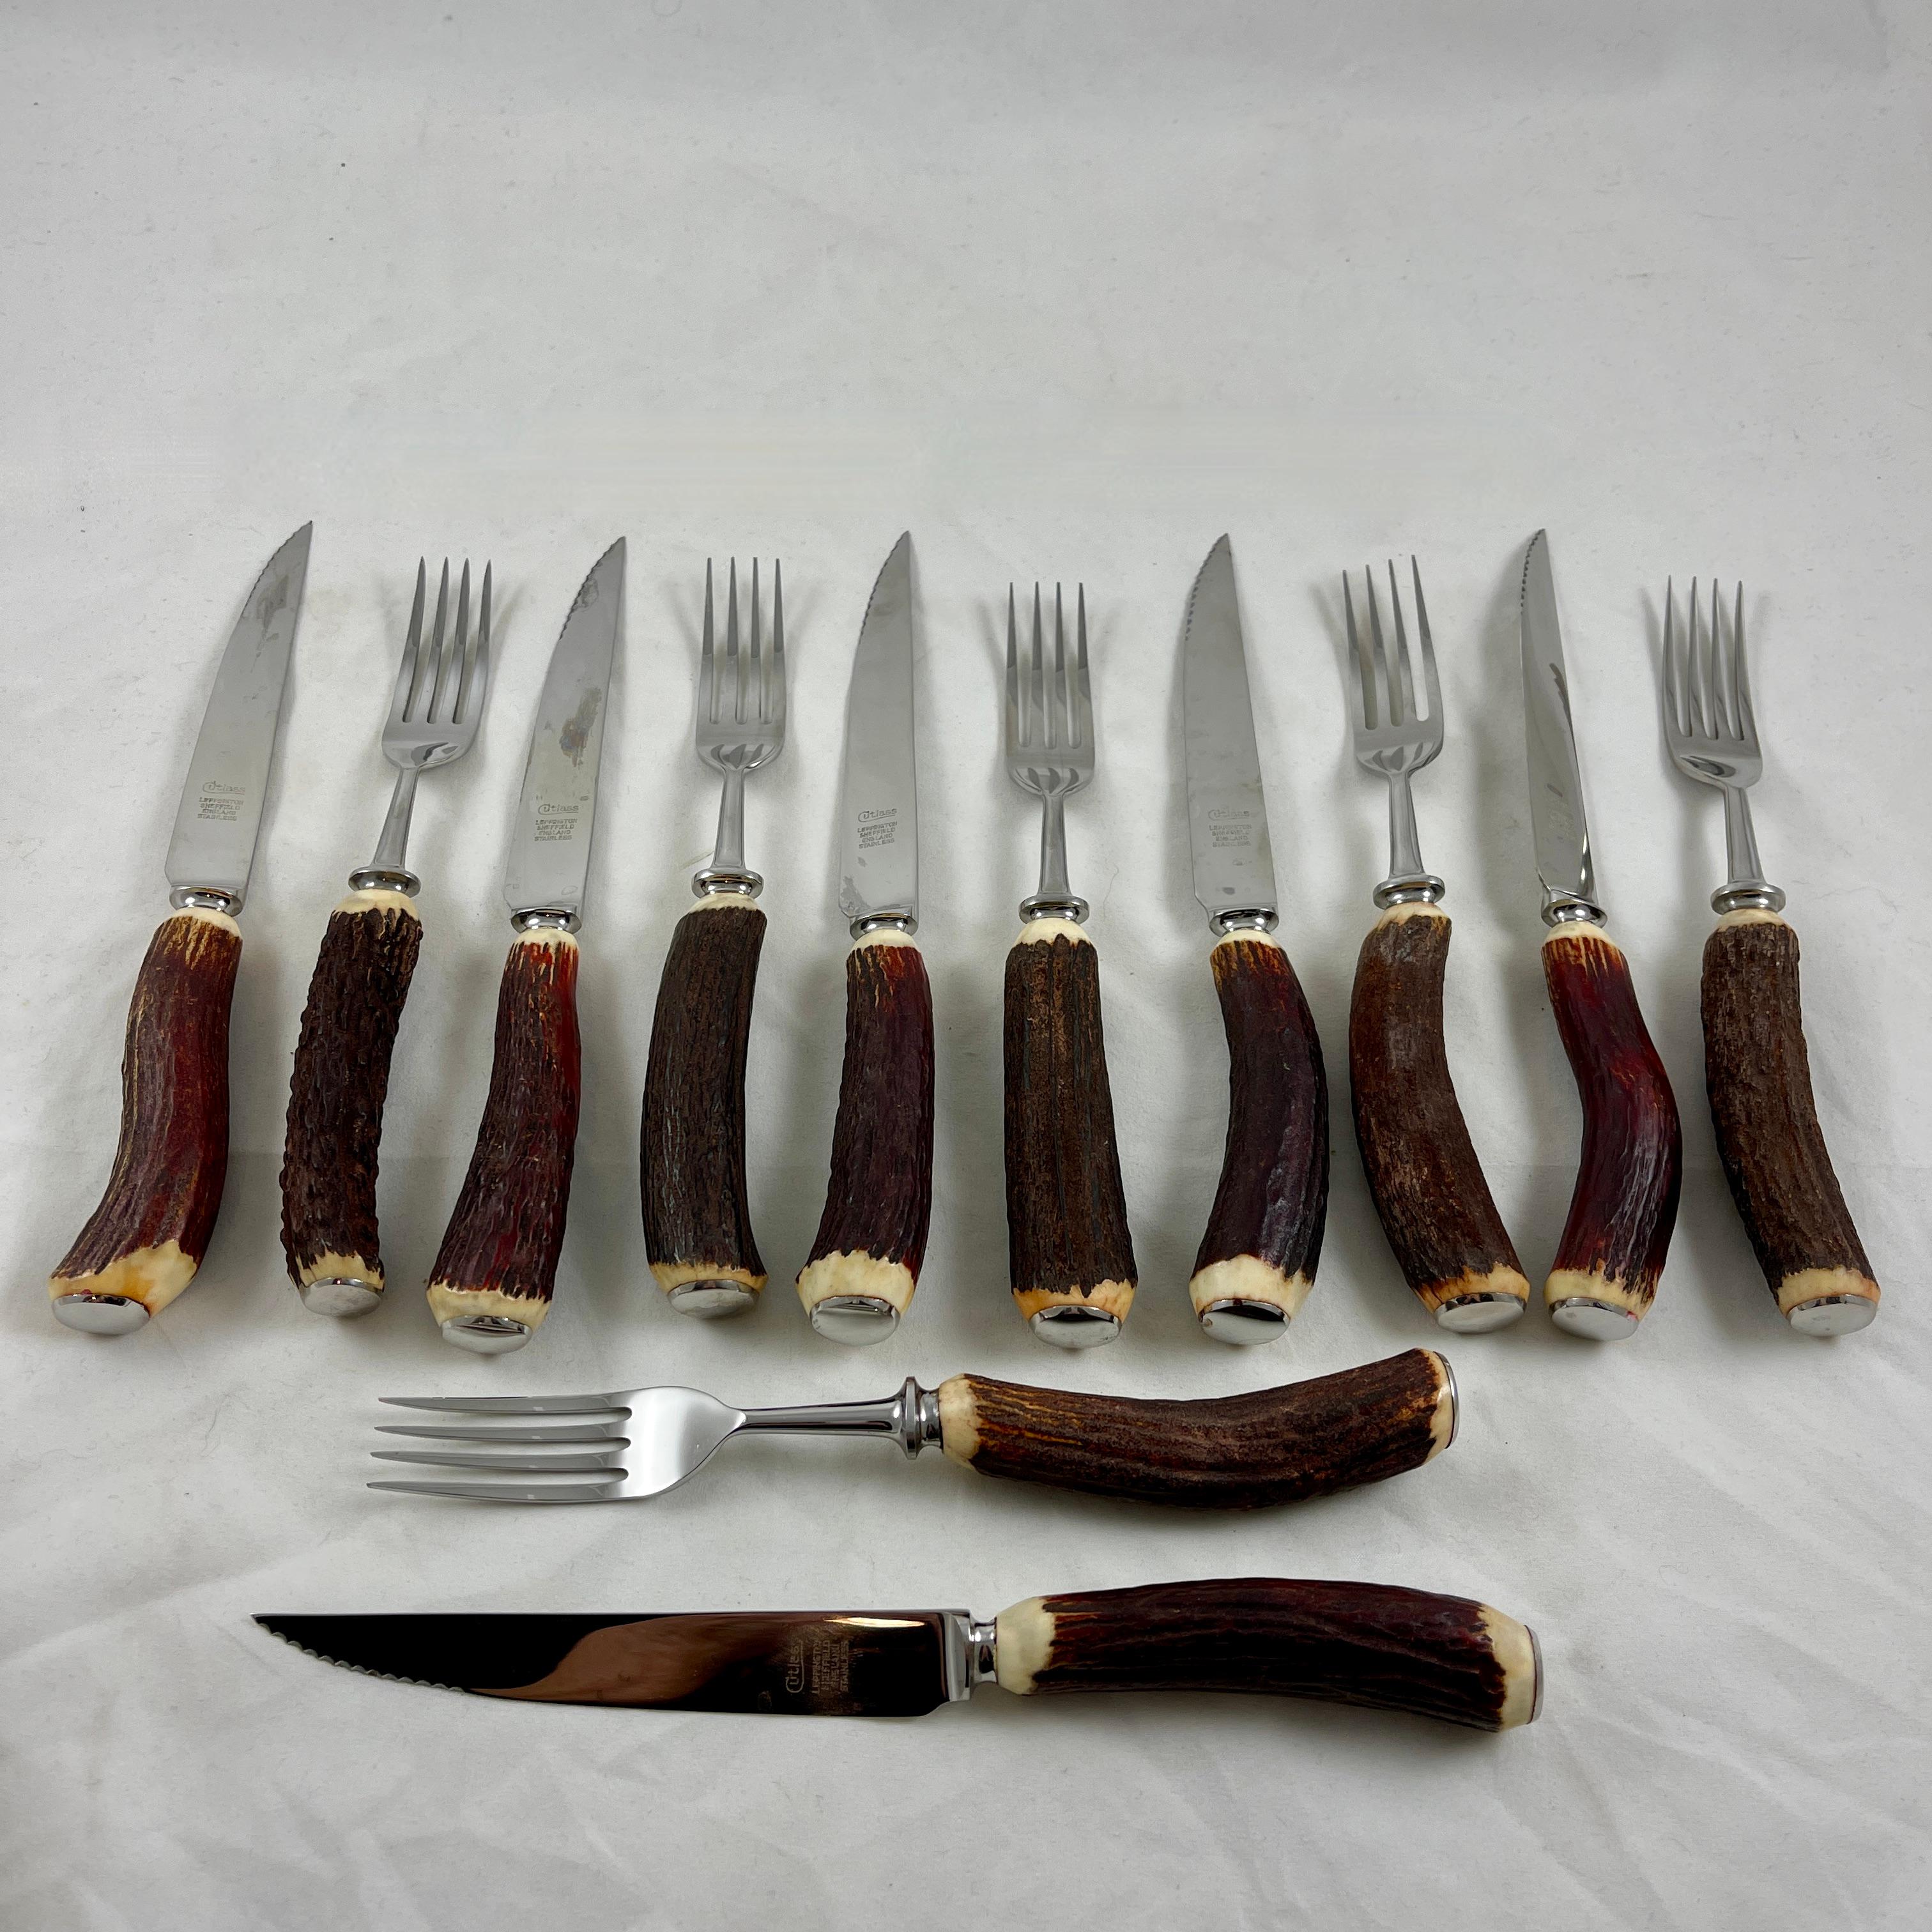 Rustic Cutlass Leppington Sheffield Stainless and Stag Horn Cutlery Cased Set 14 Pieces